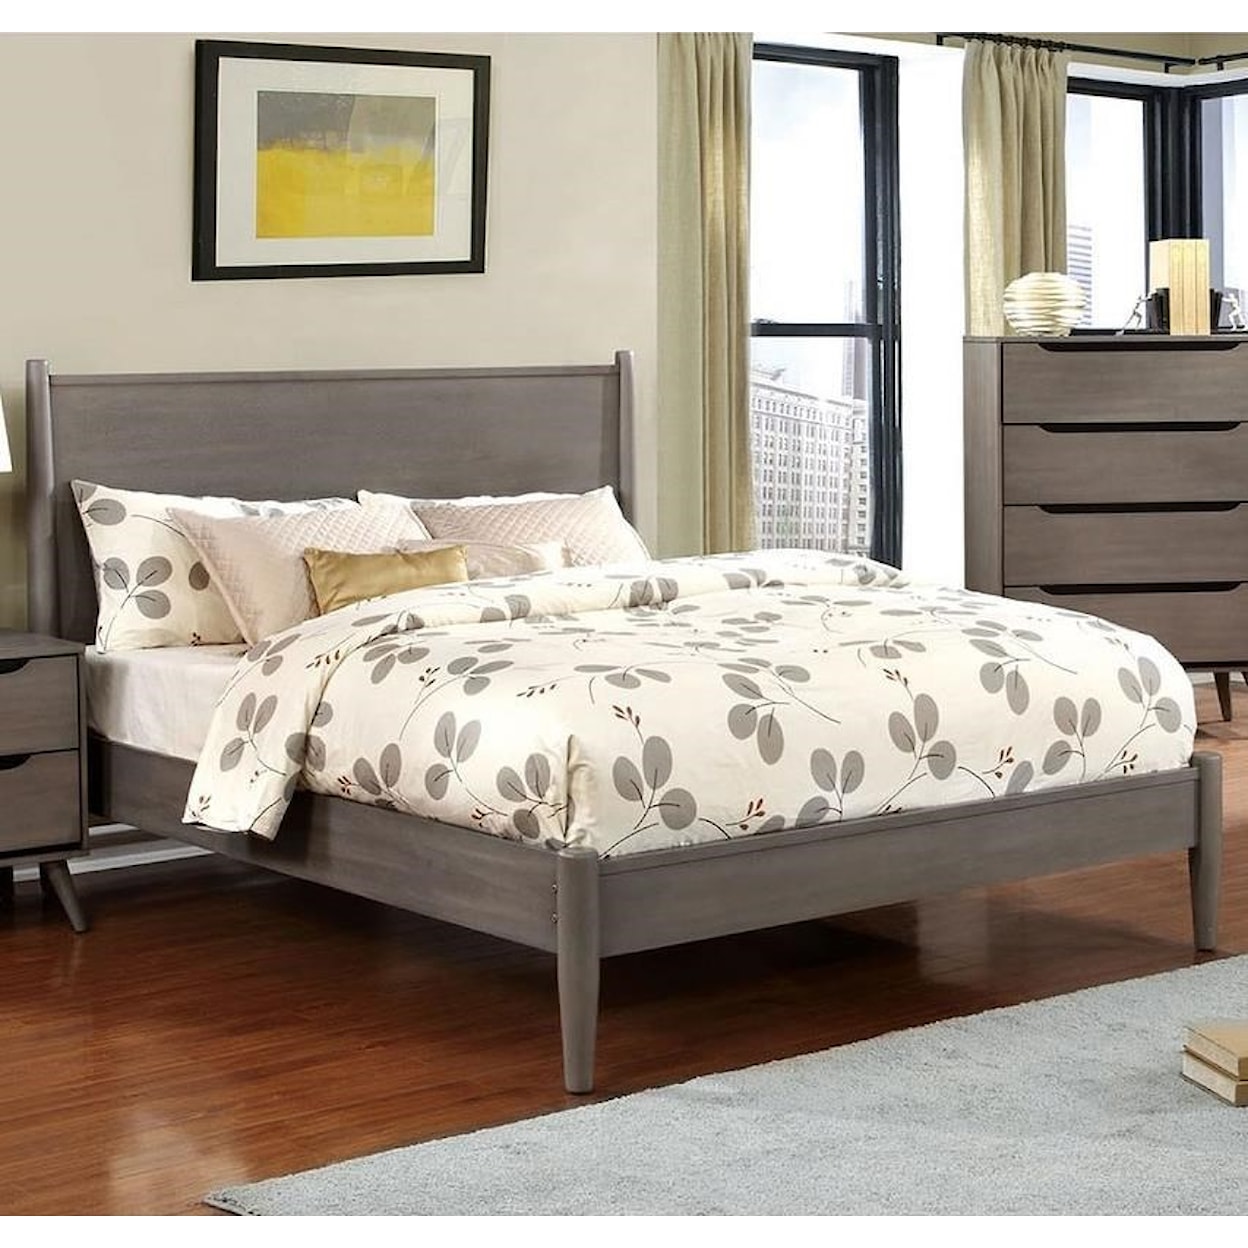 Furniture of America Lennart Queen Bed